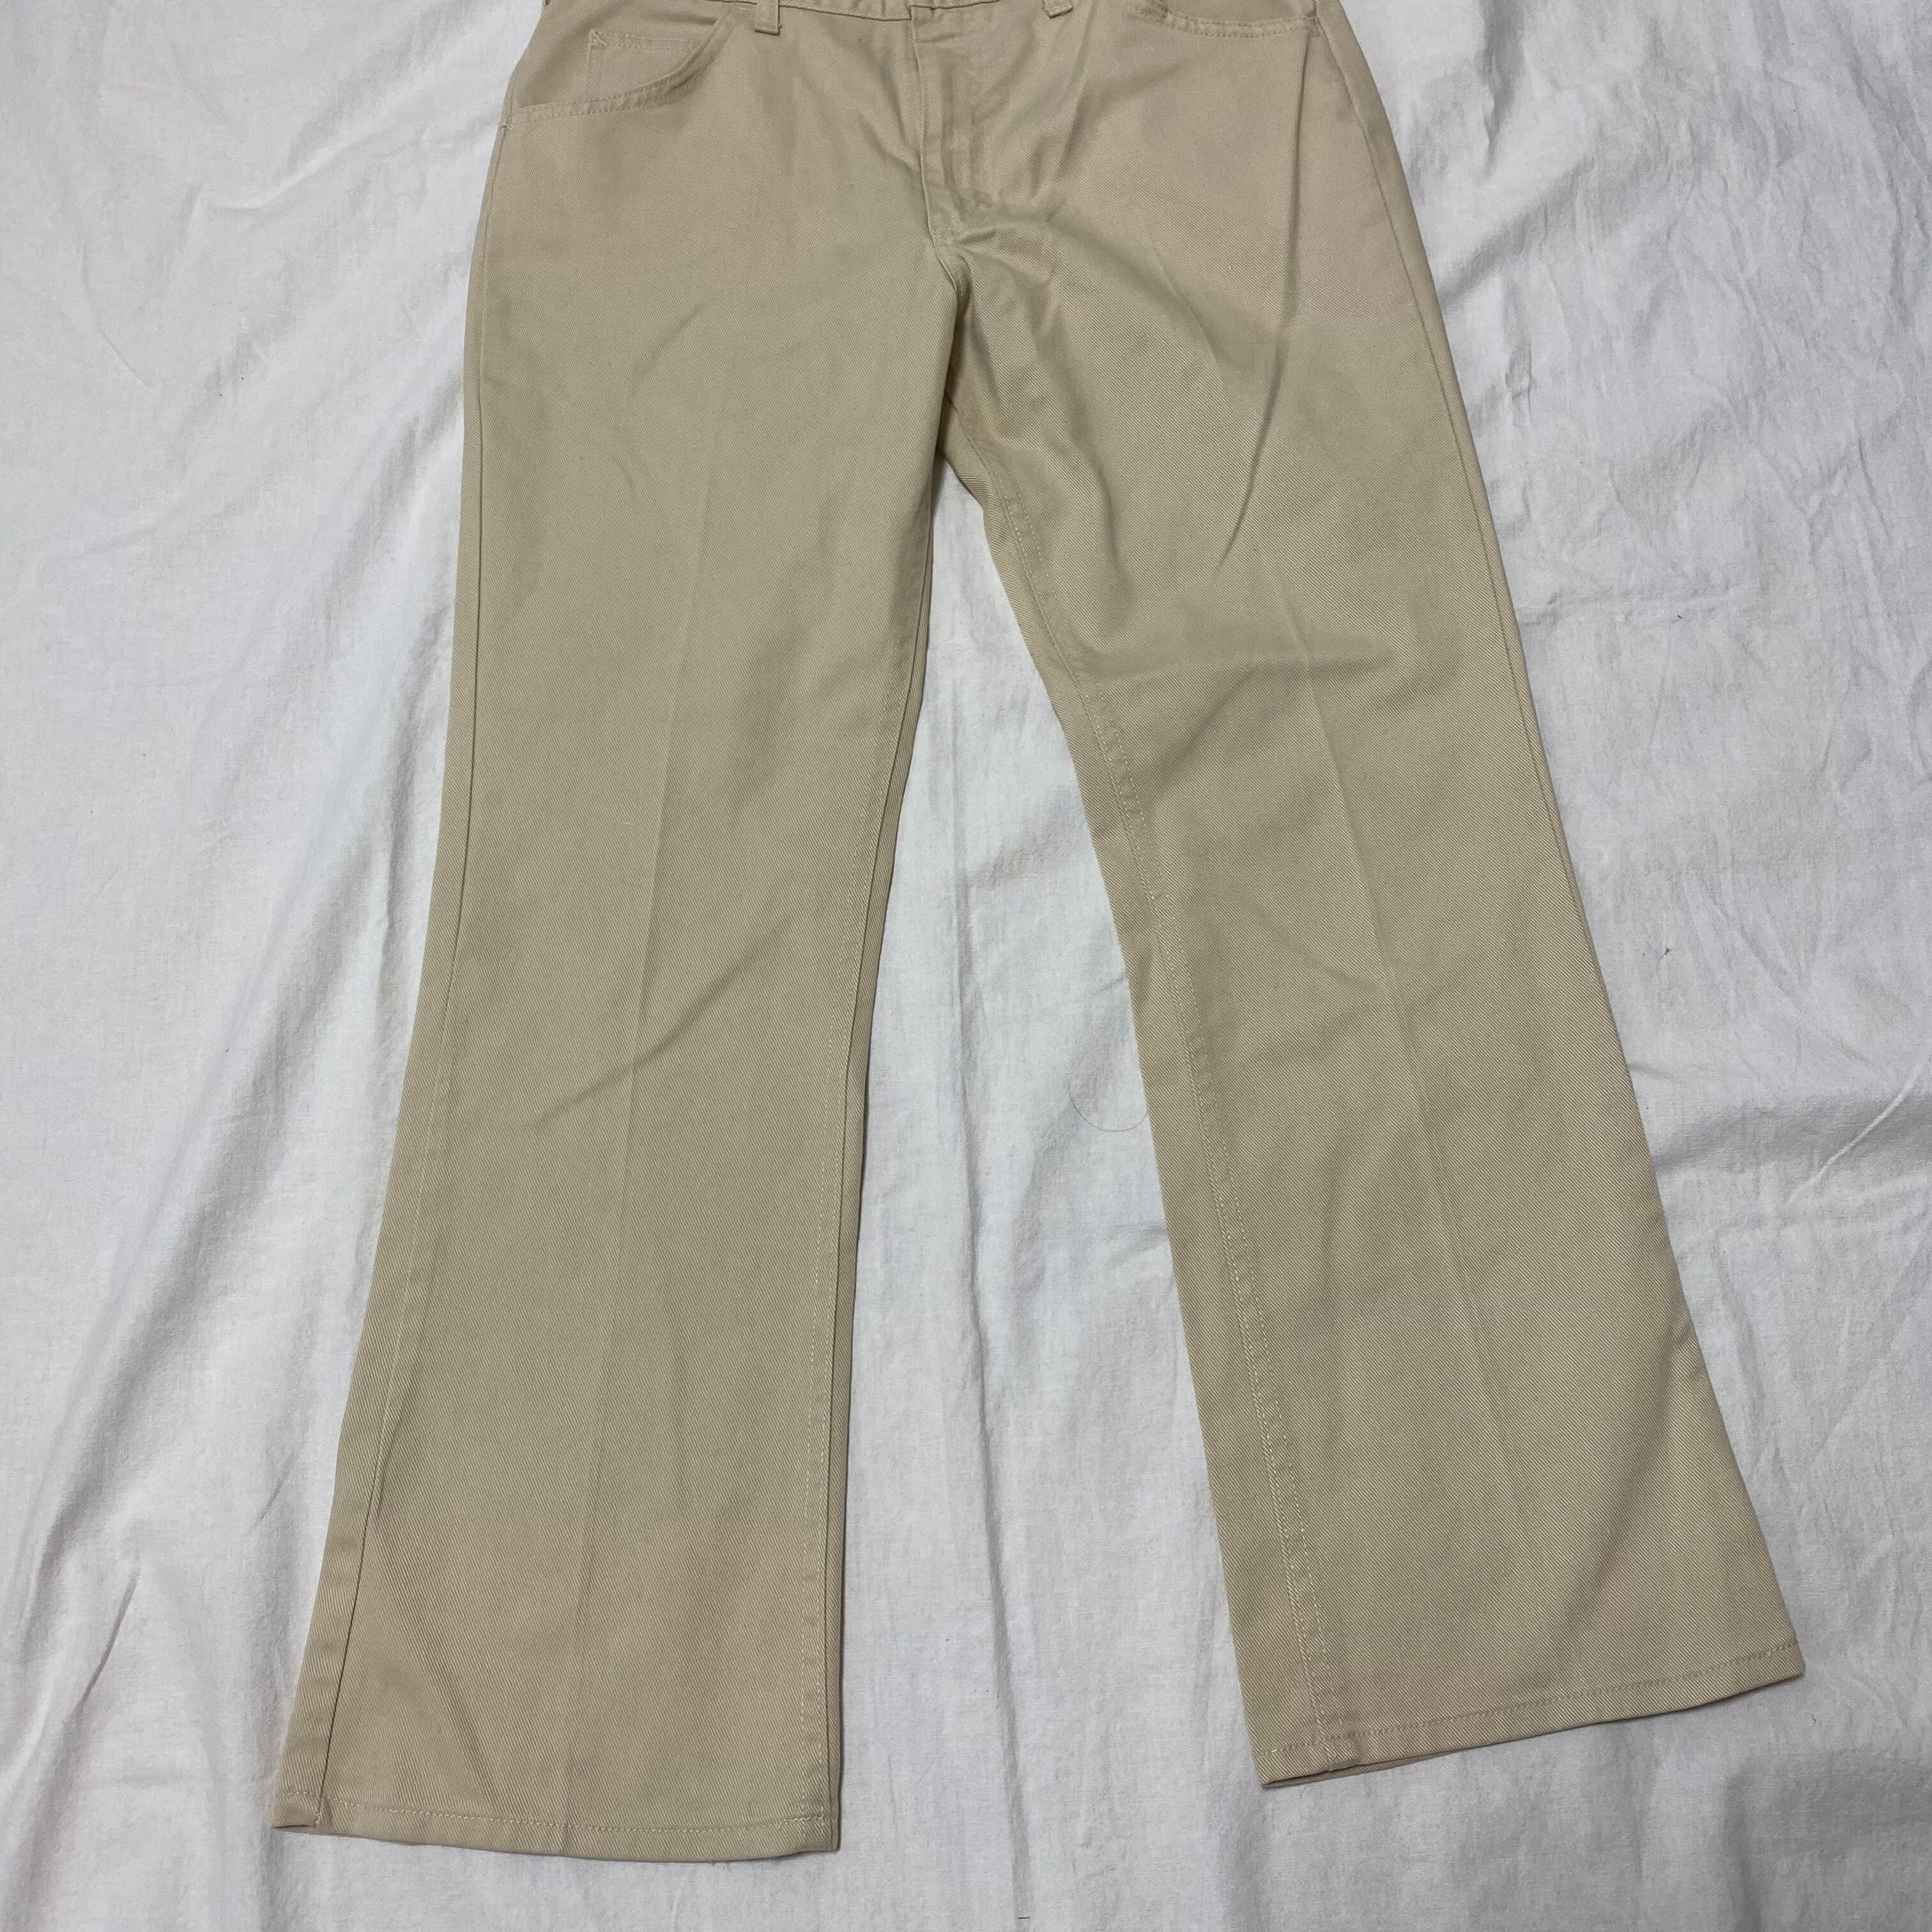 70s Lee flare pants USA製 古着 ヴィンテージ used vintage old リー ...